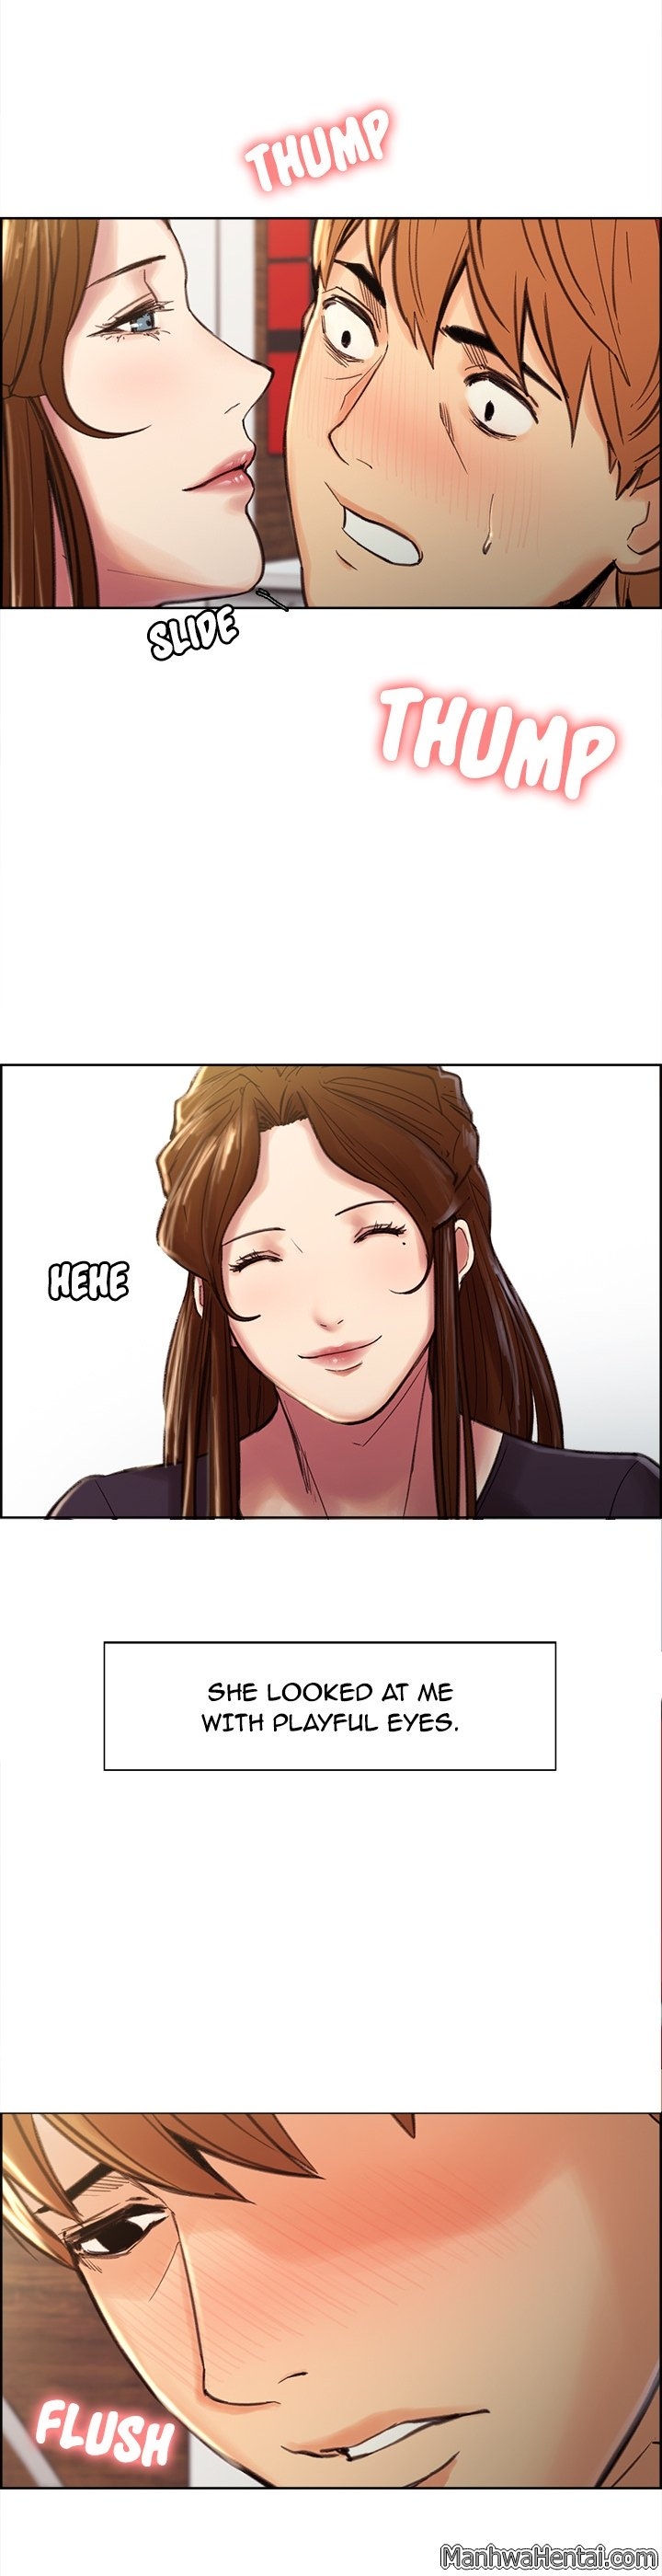 [Serious] The Sharehouse Ch. 1-11 [English] 271